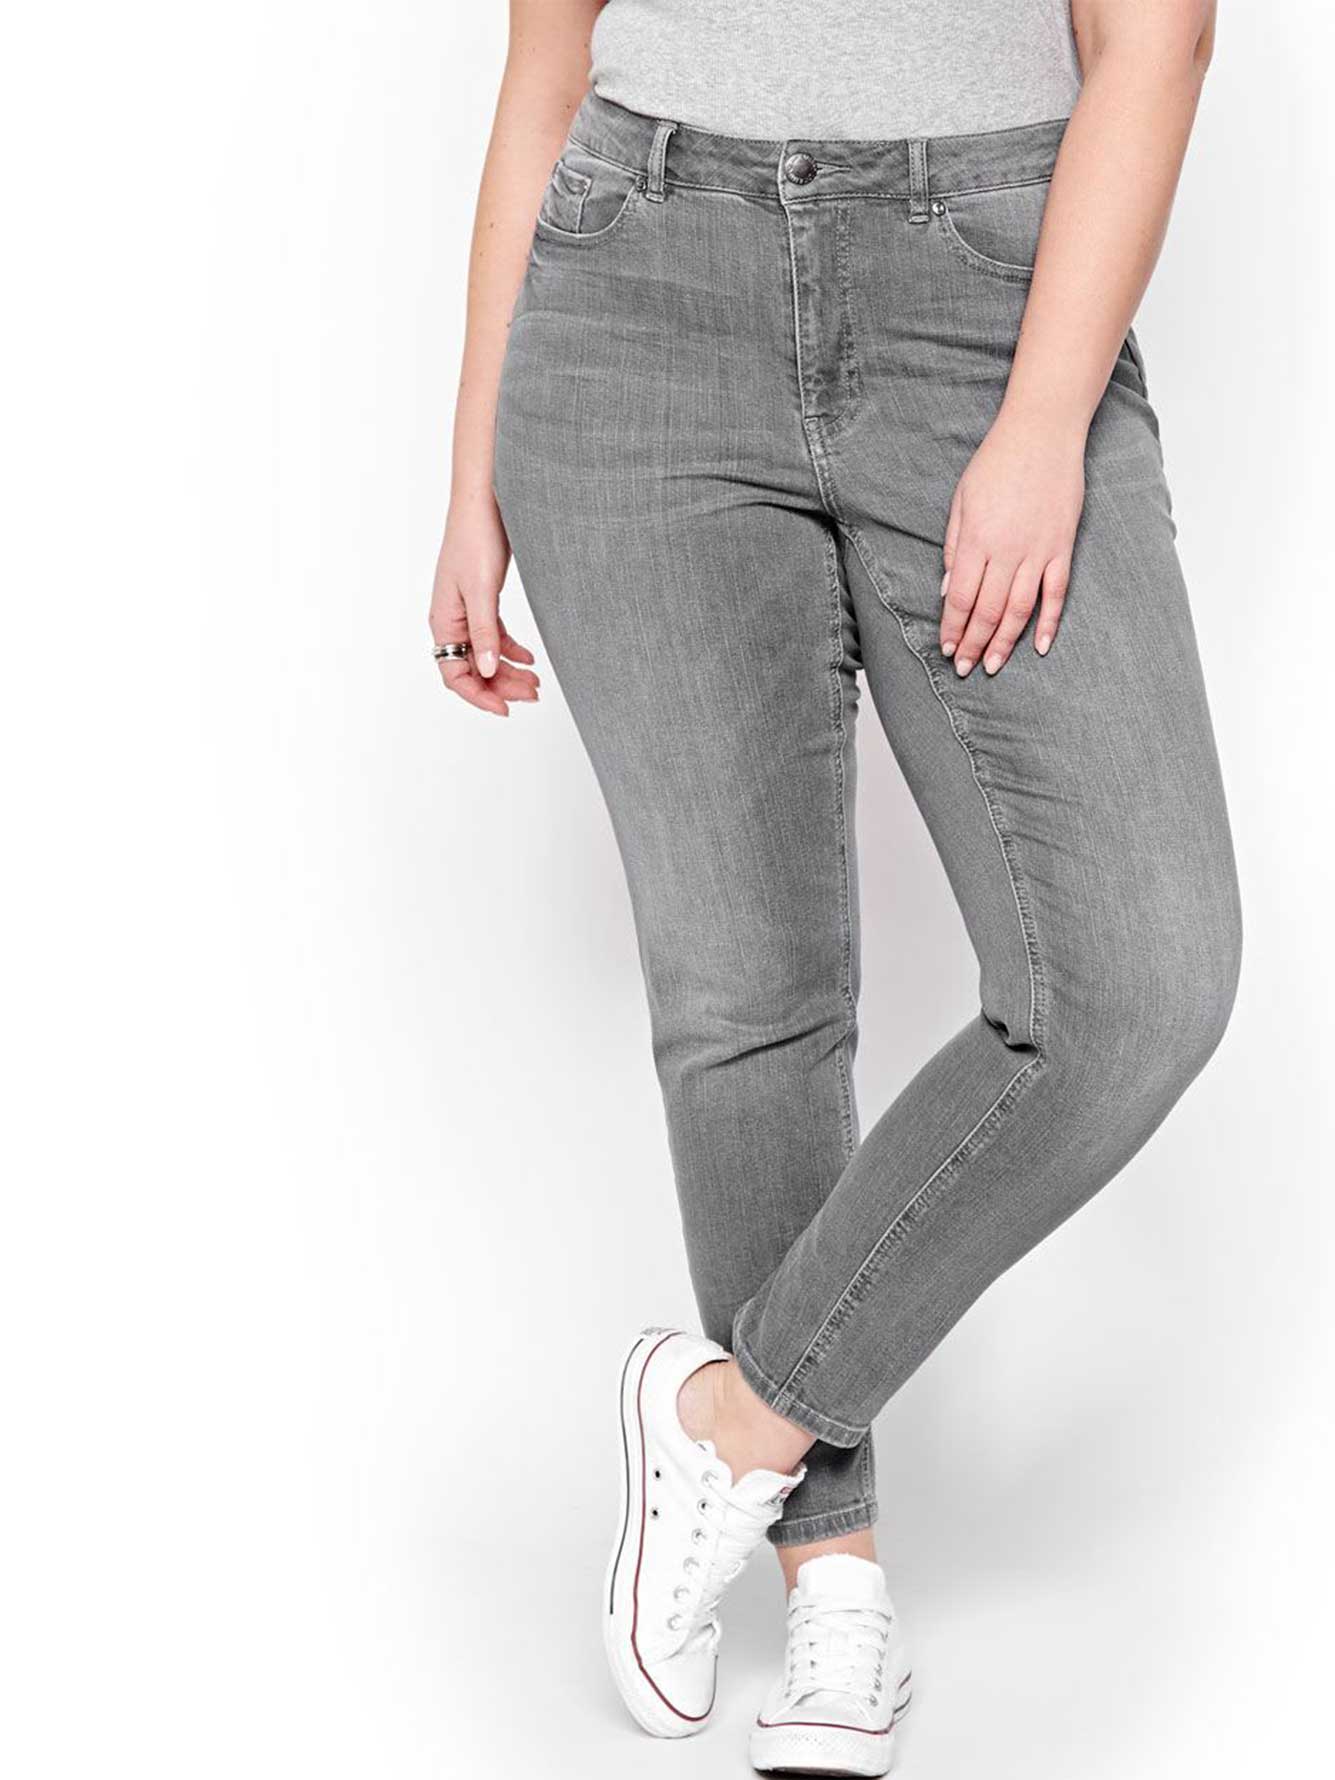 L&L Authentic Gray Regular Rise Skinny Jeans | Addition Elle